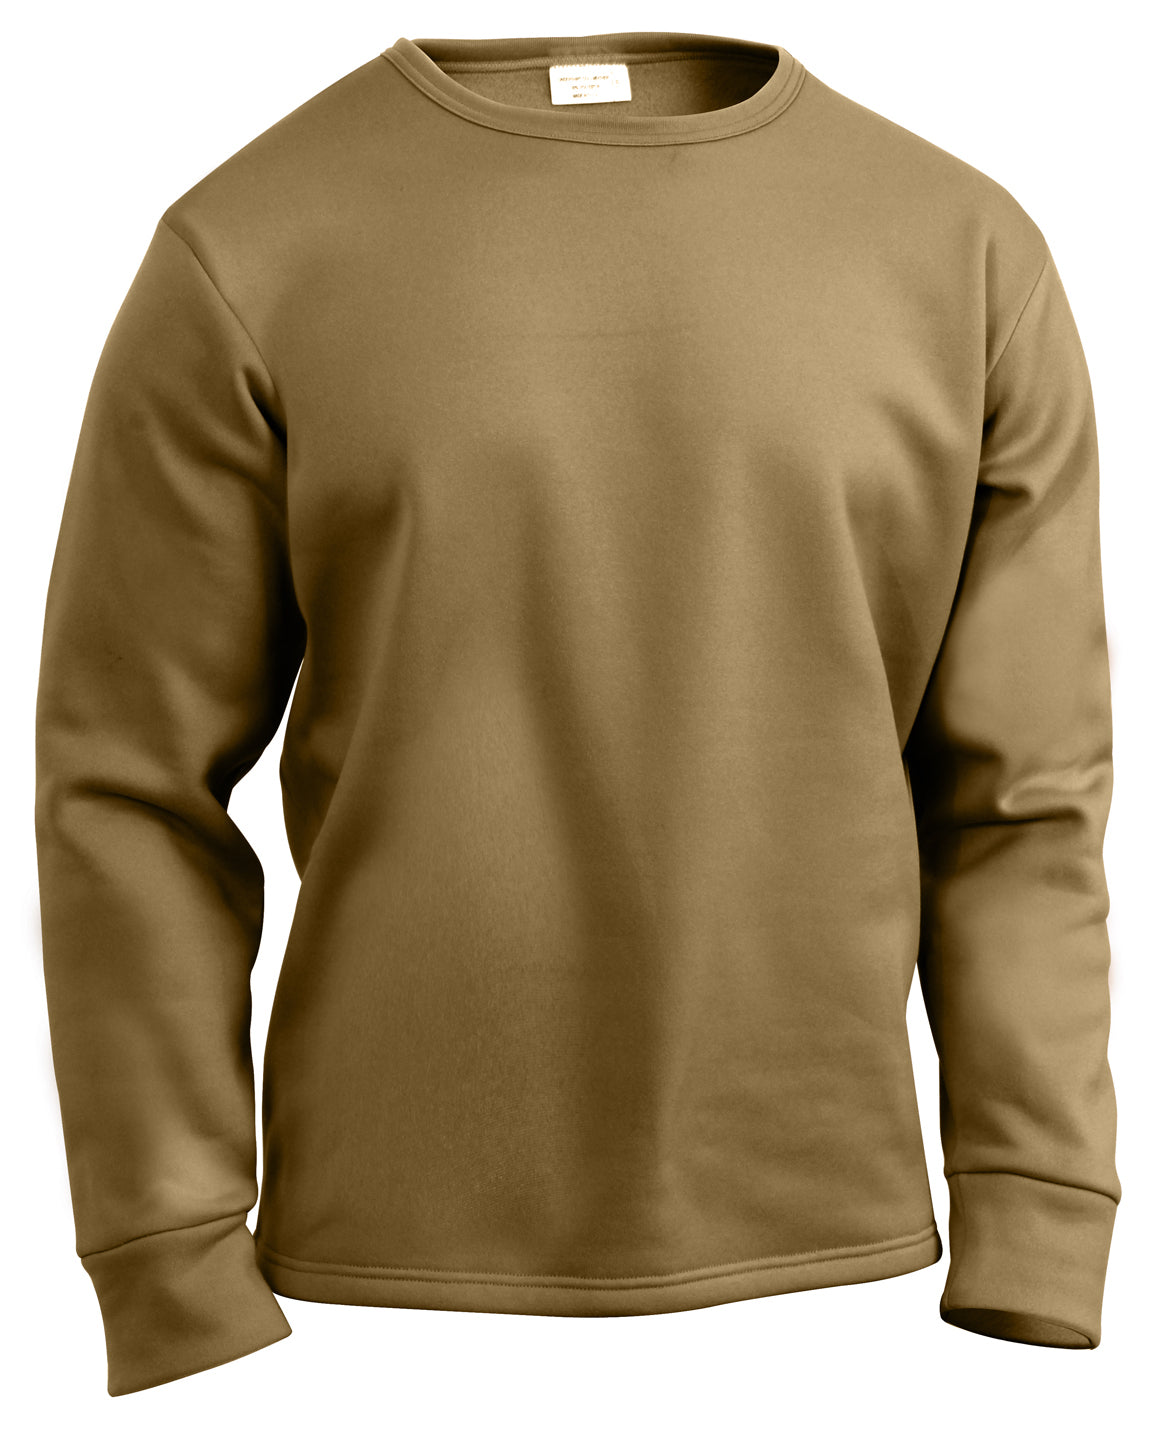 Rothco ECWCS Poly Crew Neck Top - Coyote Brown Extreme Cold Weather Undershirt